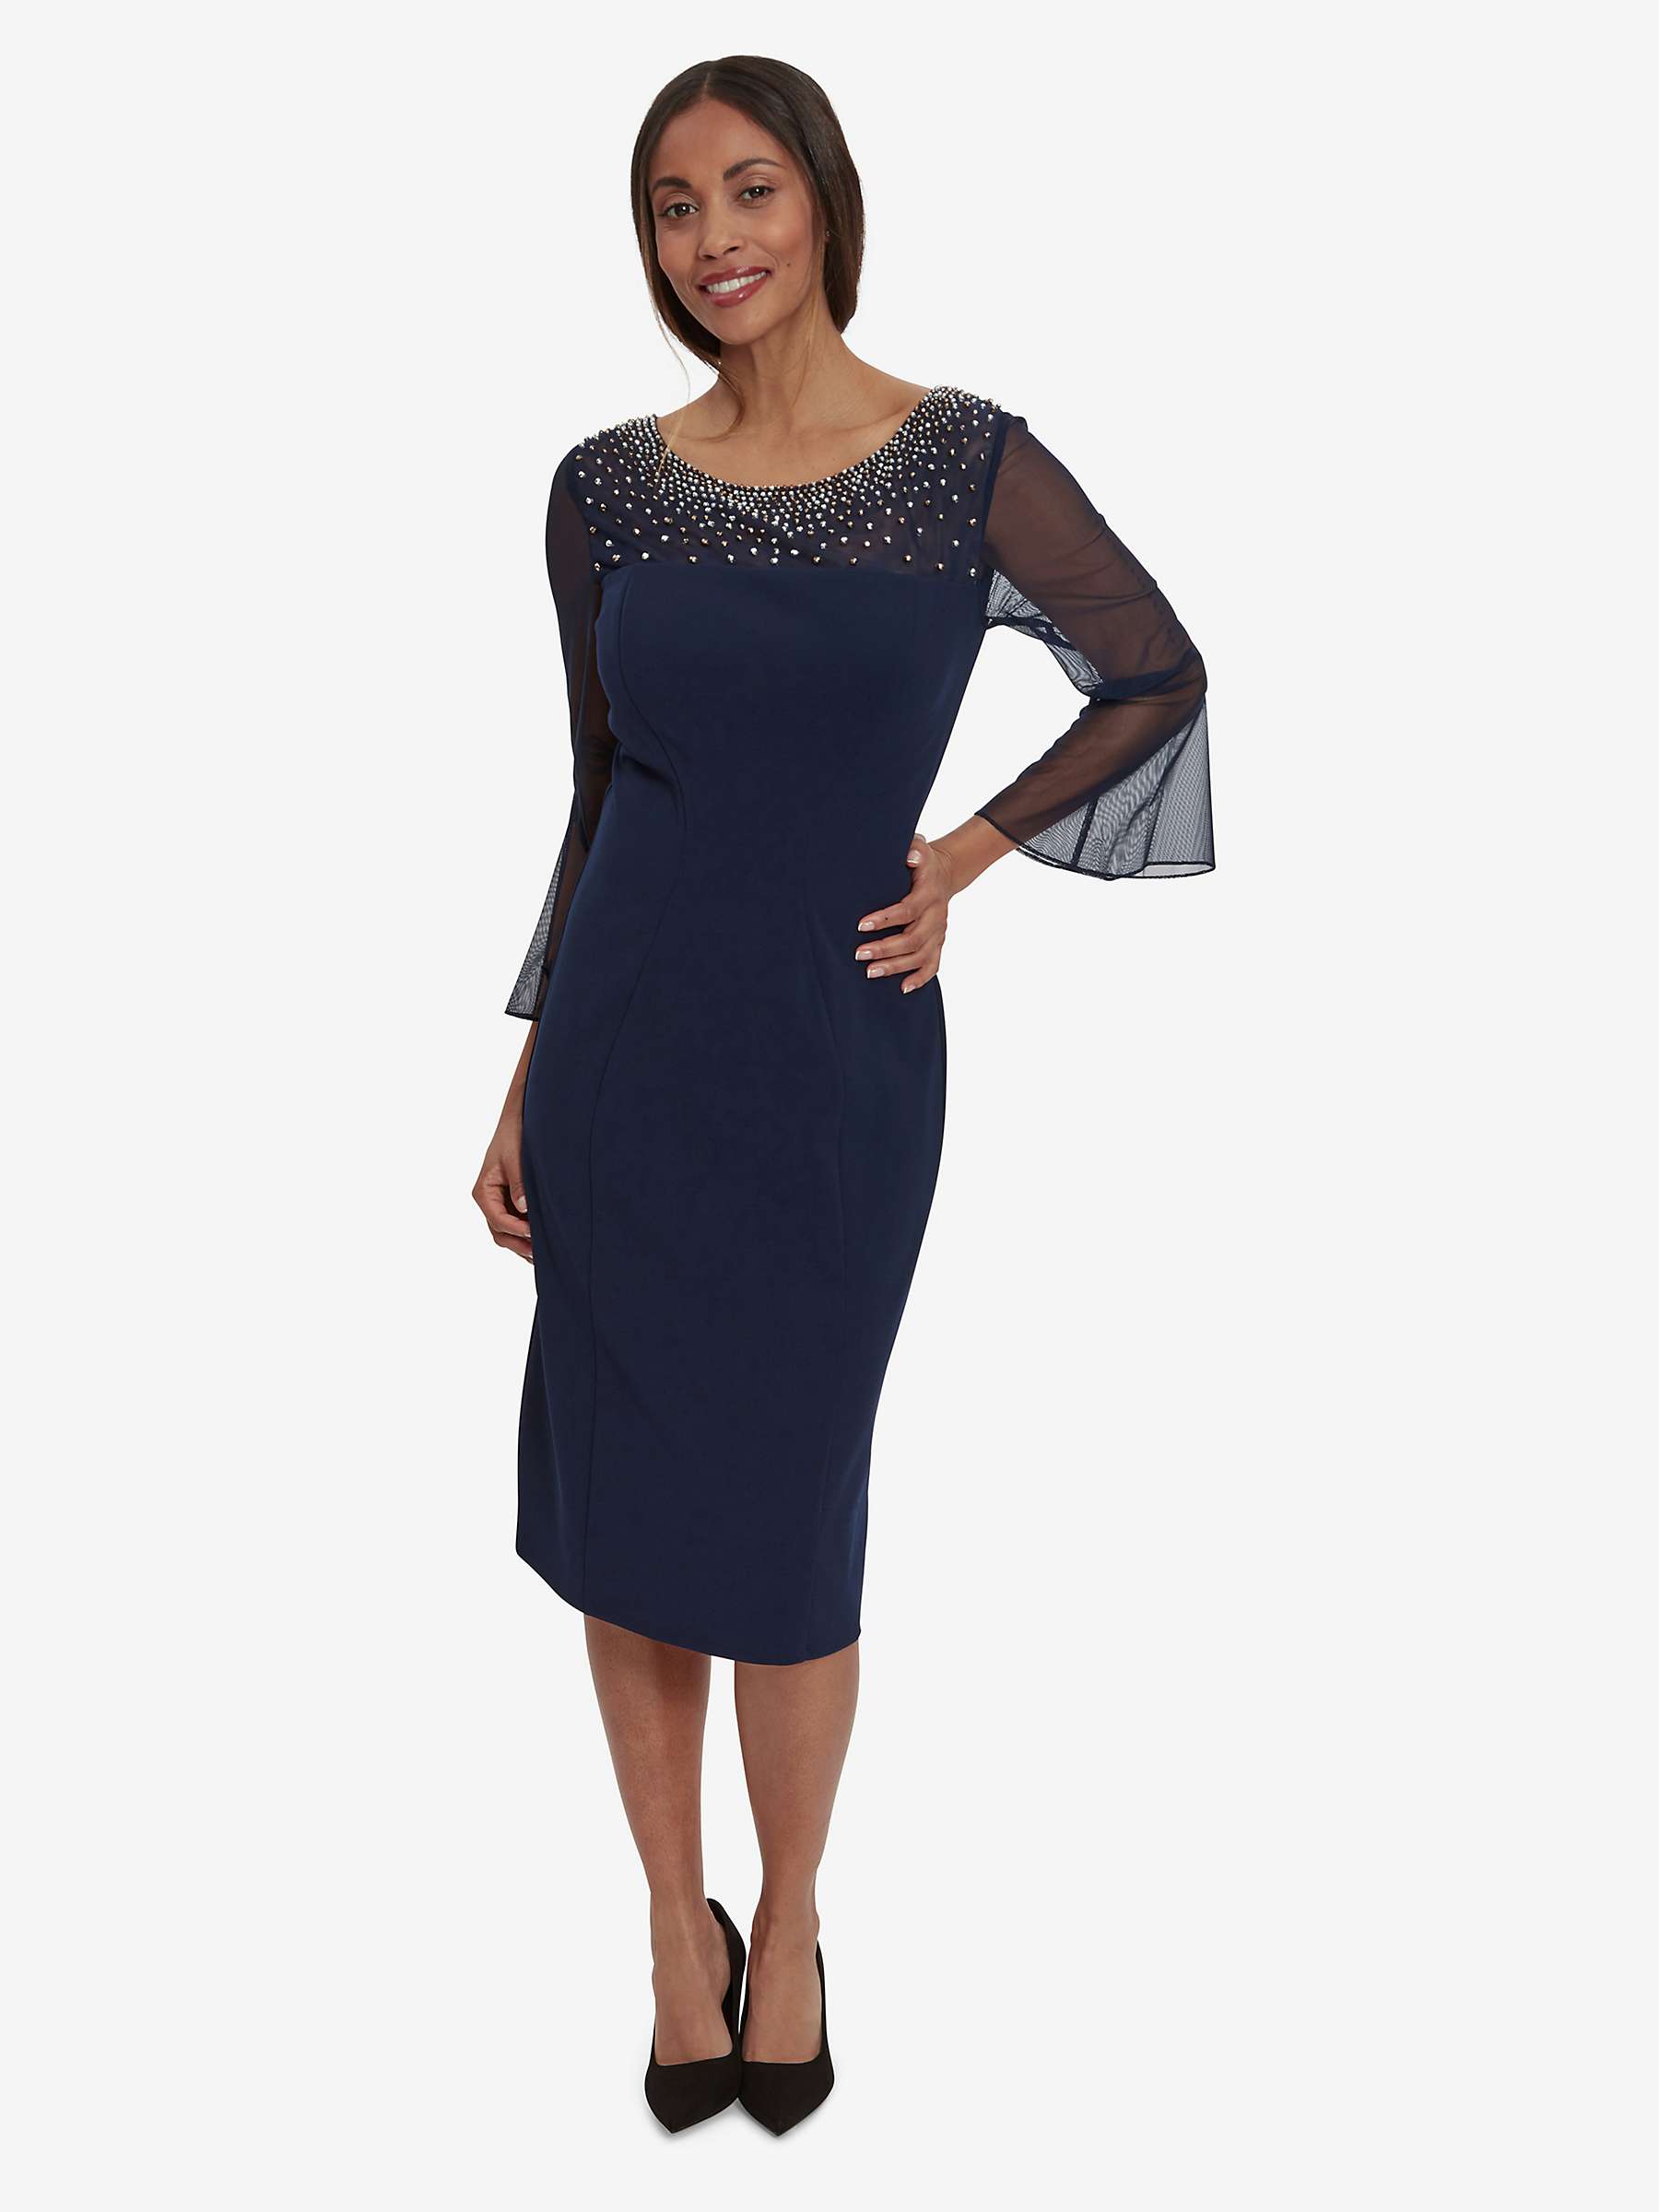 Buy Gina Bacconi Maurine Beaded Dress, Navy/Silver Online at johnlewis.com